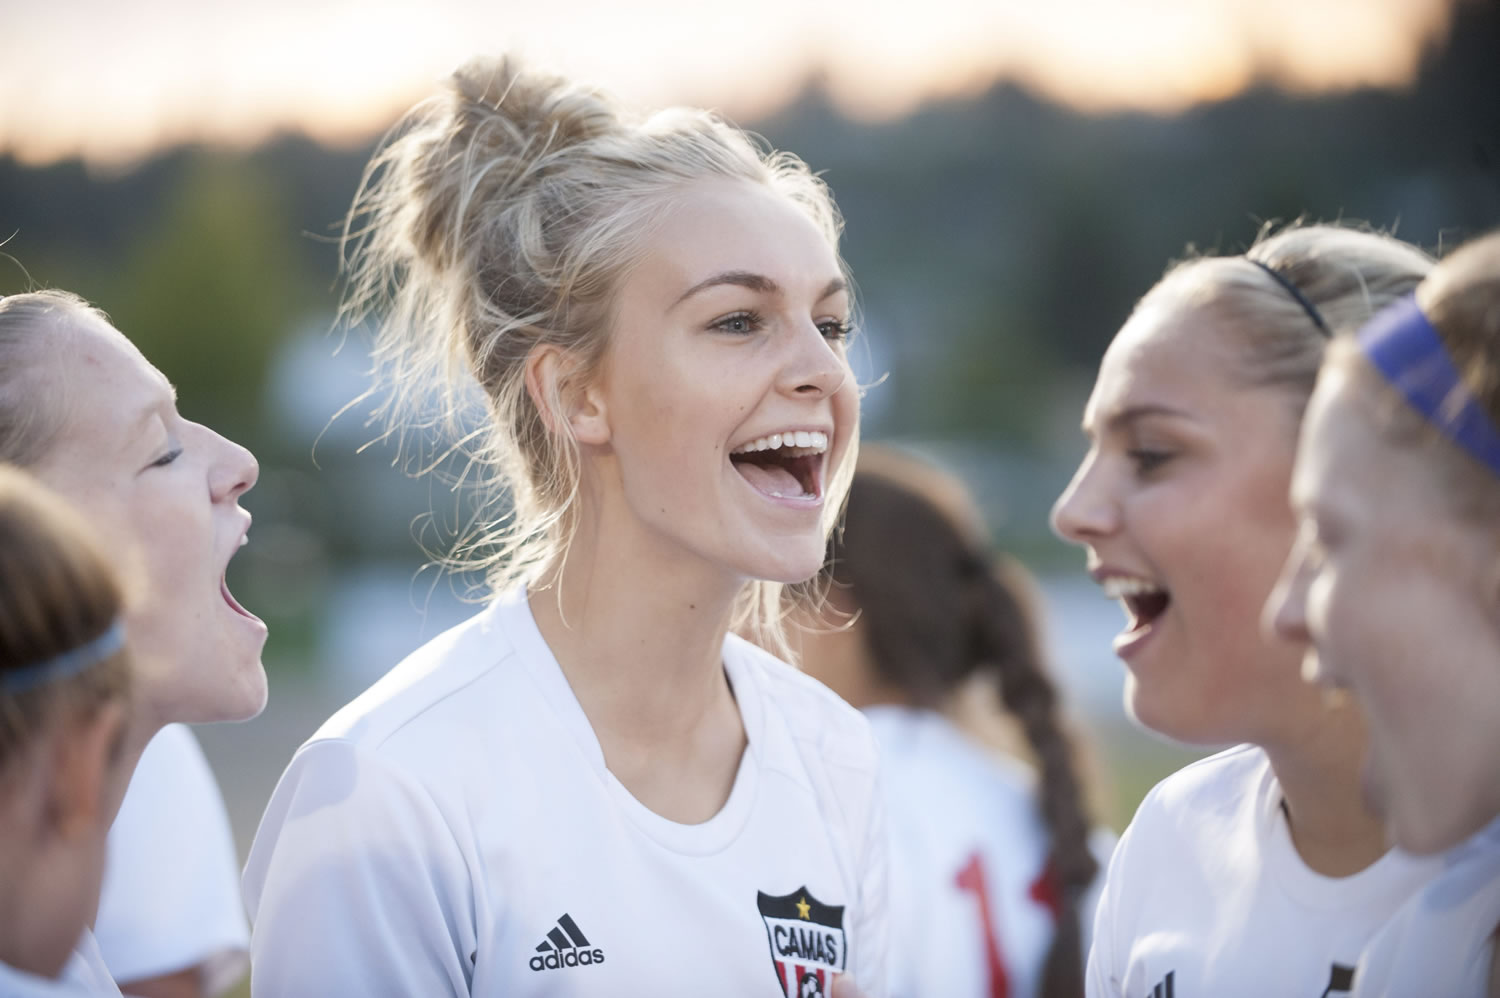 Camas senior Mason Minder takes her role as team captain seriously as she gets the team pumped up for a recent match against Evergreen.